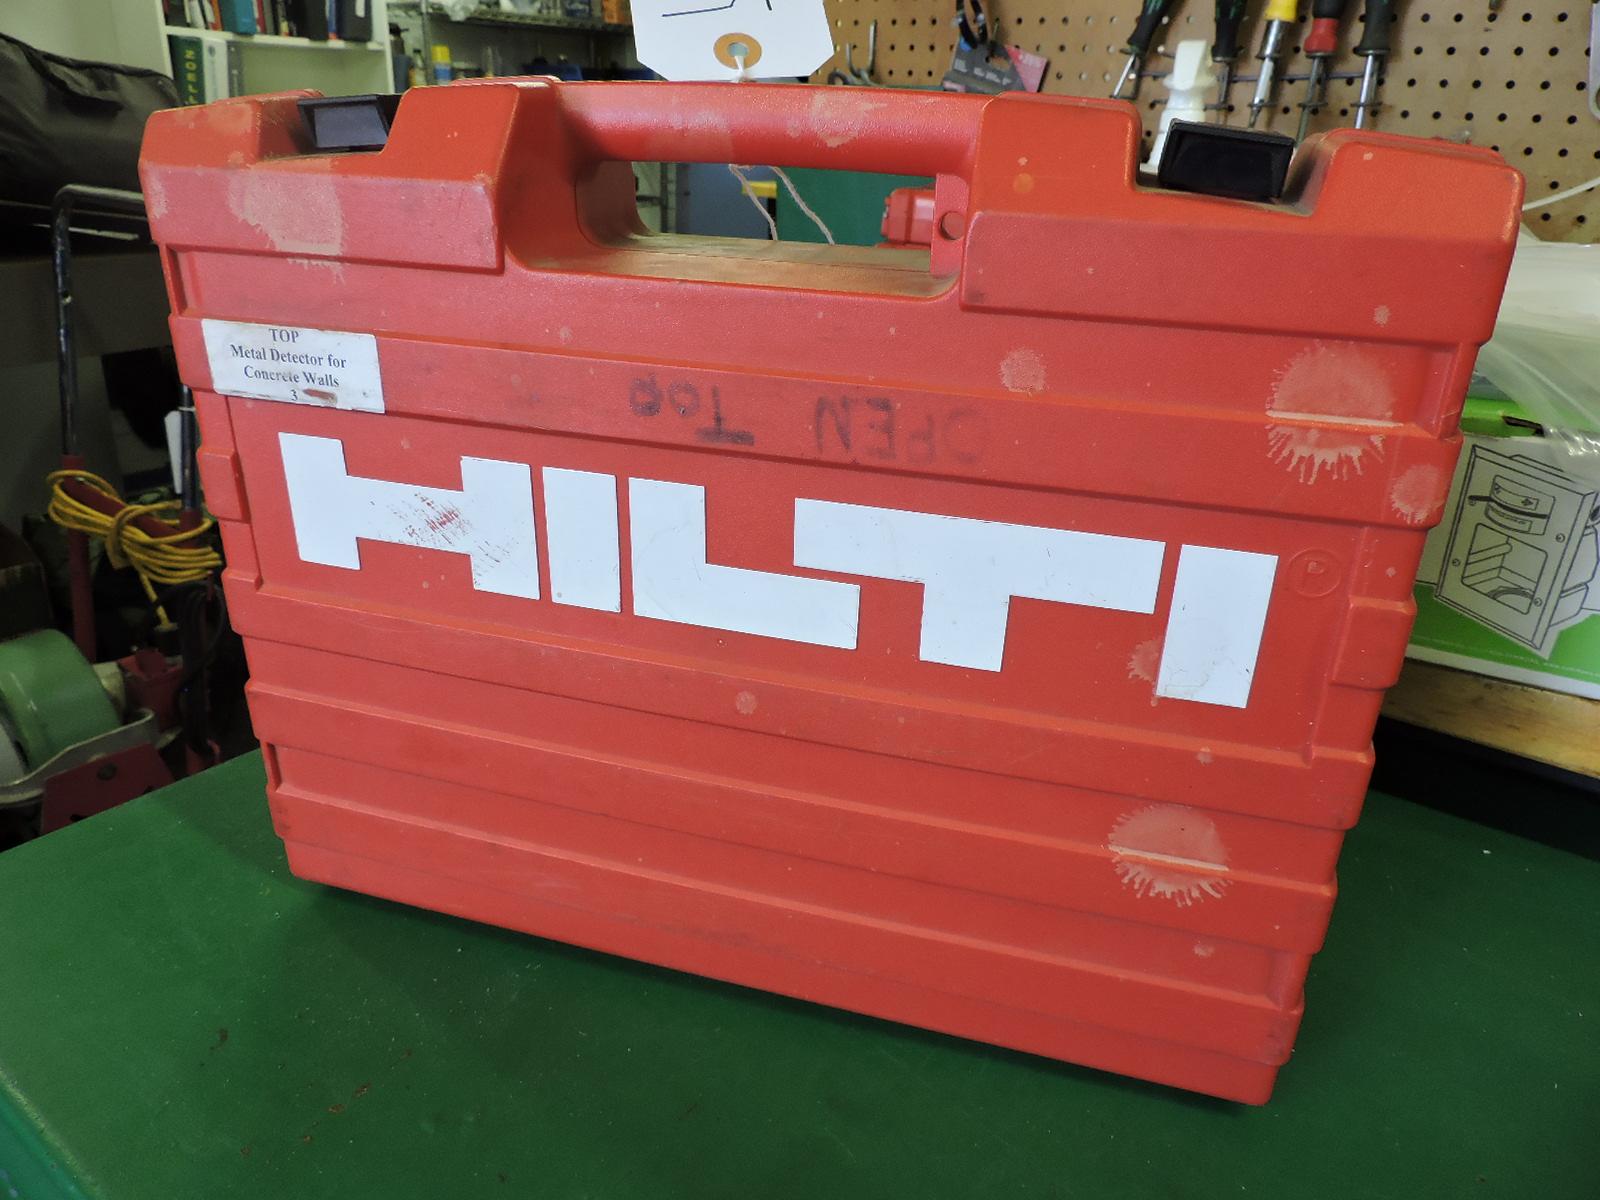 HILTI Brand - Metal Detector for Concrete Walls - with Case